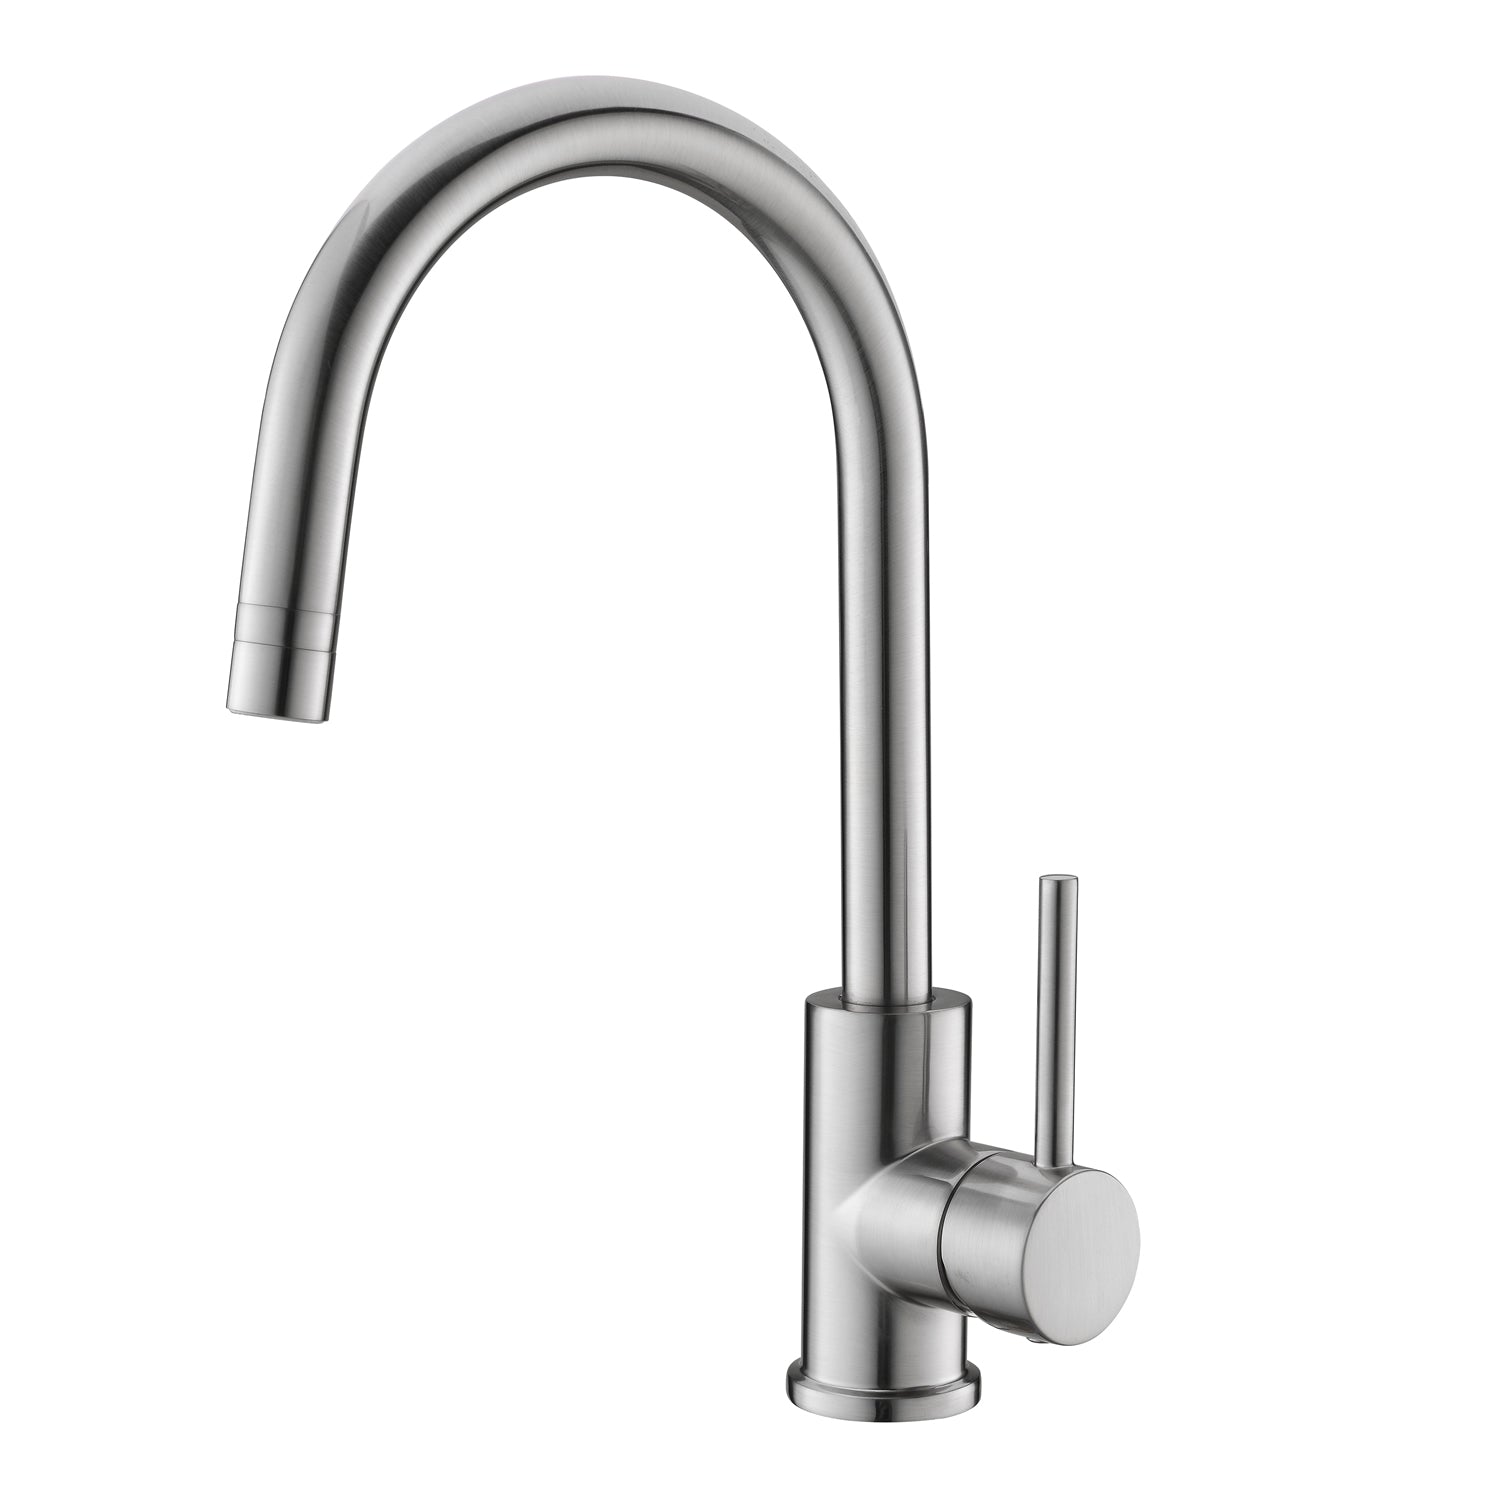 DAX Single Handle Kitchen Faucet with Swivel Spout, Brass Body, Brushed Nickel Finish, 7-1/4 x 13-11/16 Inches (DAX-6515-BN)